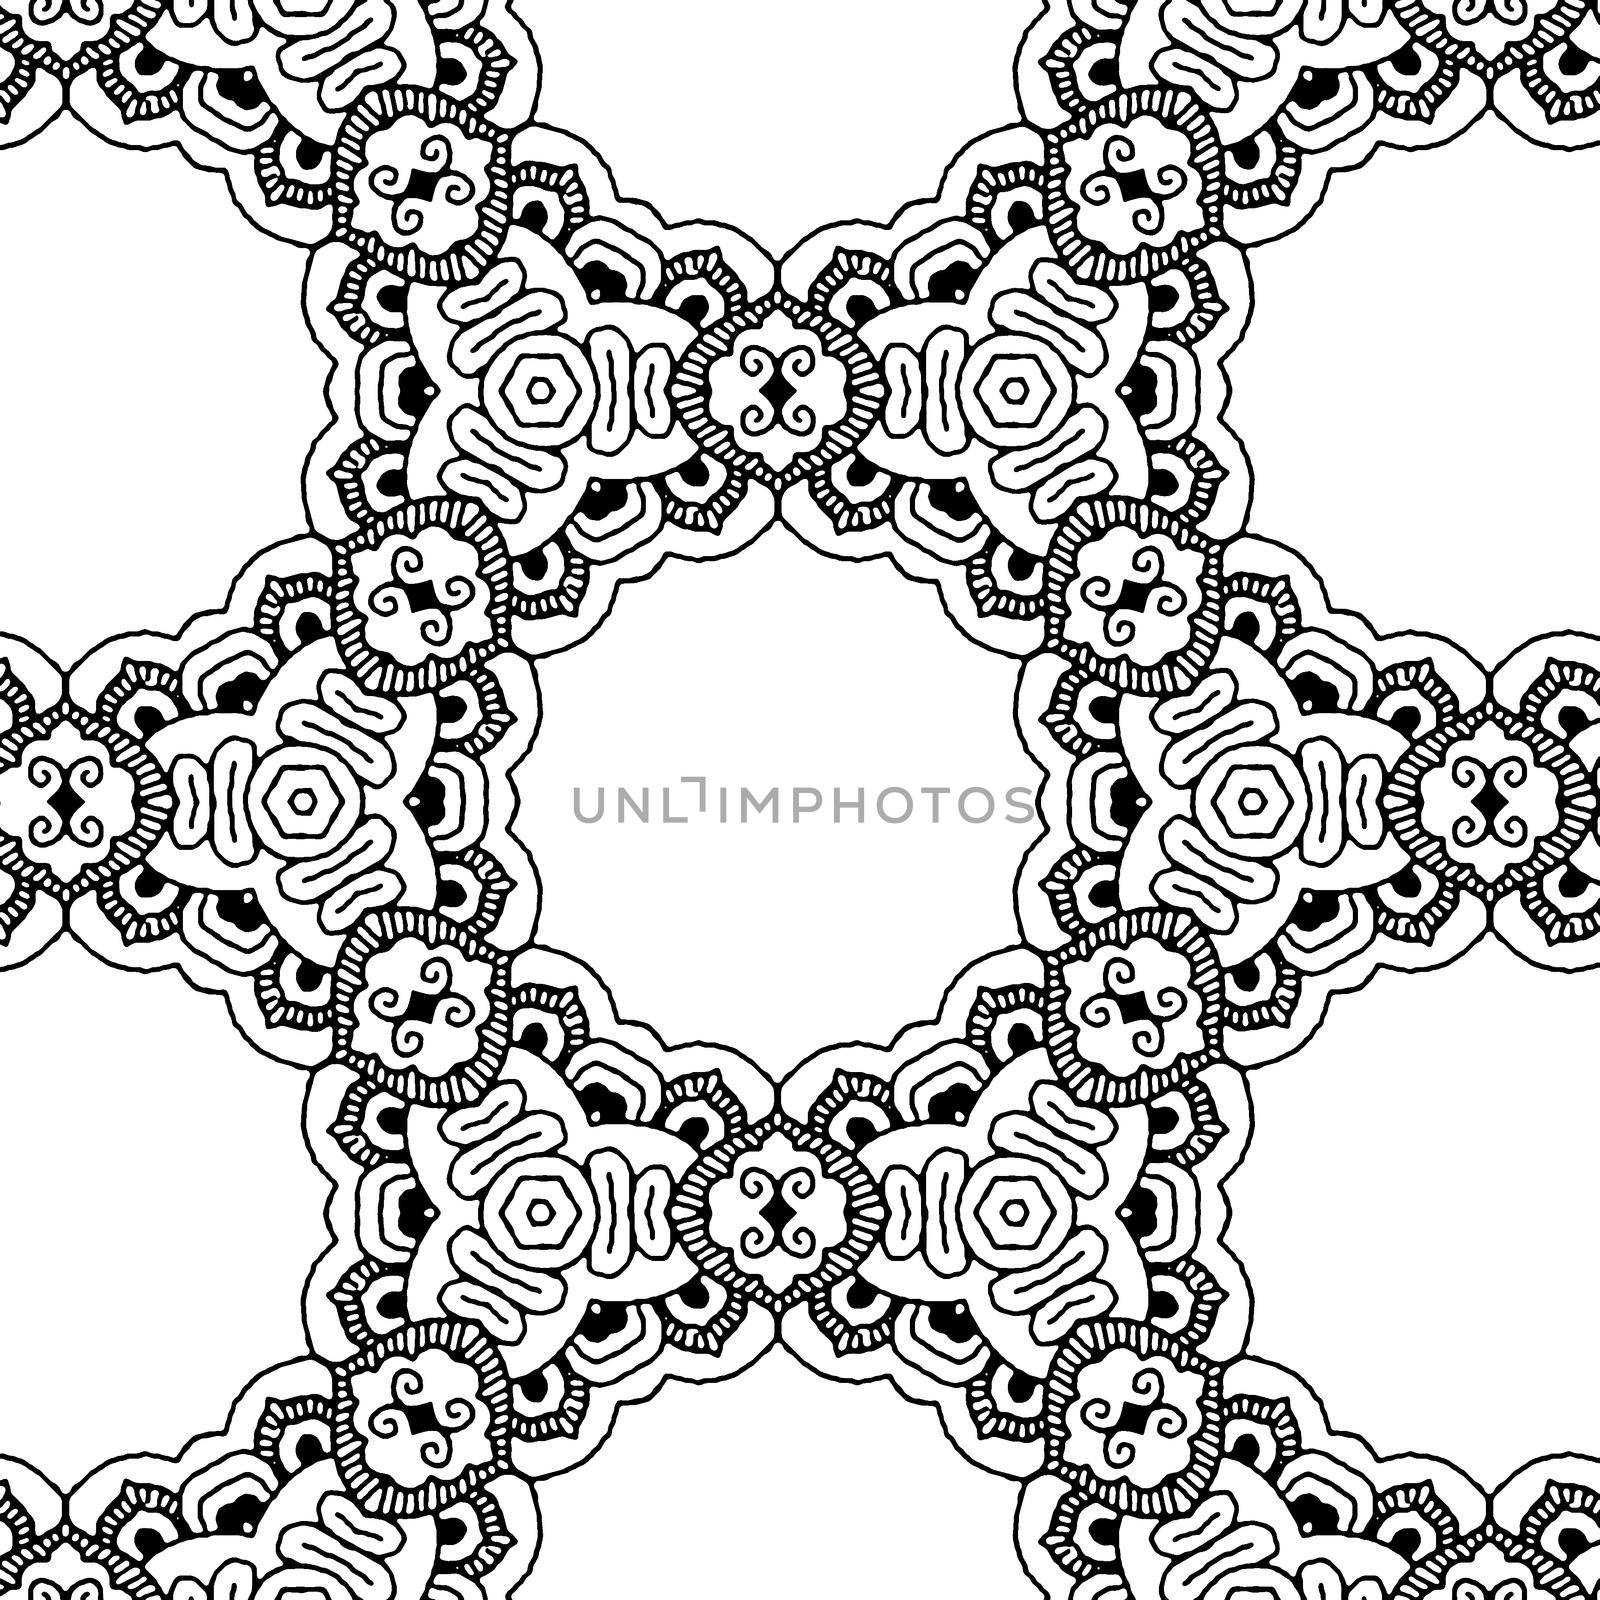 Beautiful and elegant monochromatic and grey symmetrical pattern designs on solid sheet of wallpaper